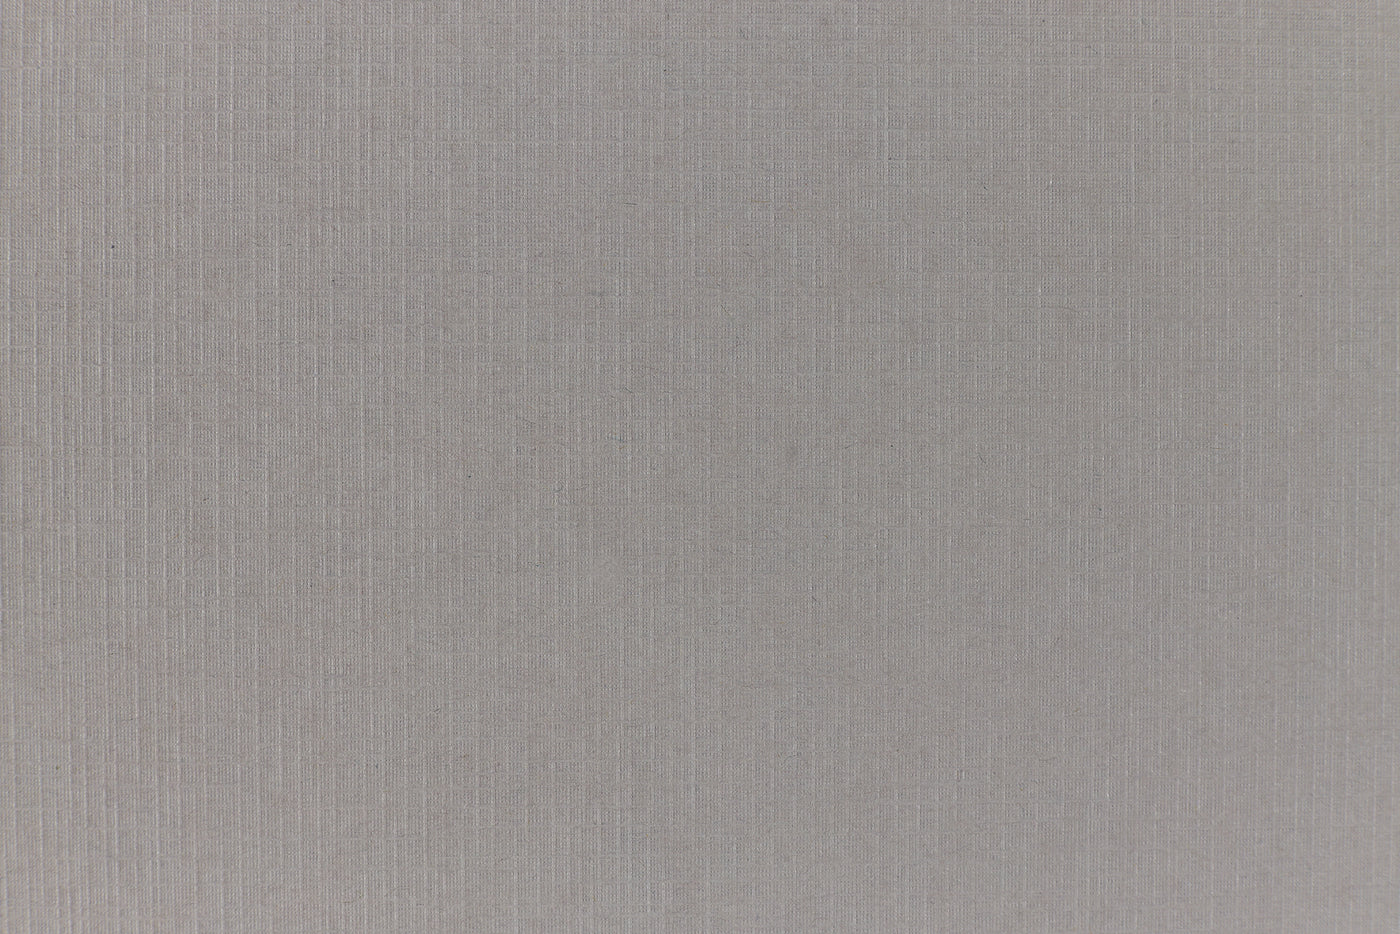 Pewter Gray Cardstock, Linen Pattern (Royaltone, Cover Weight) – French  Paper